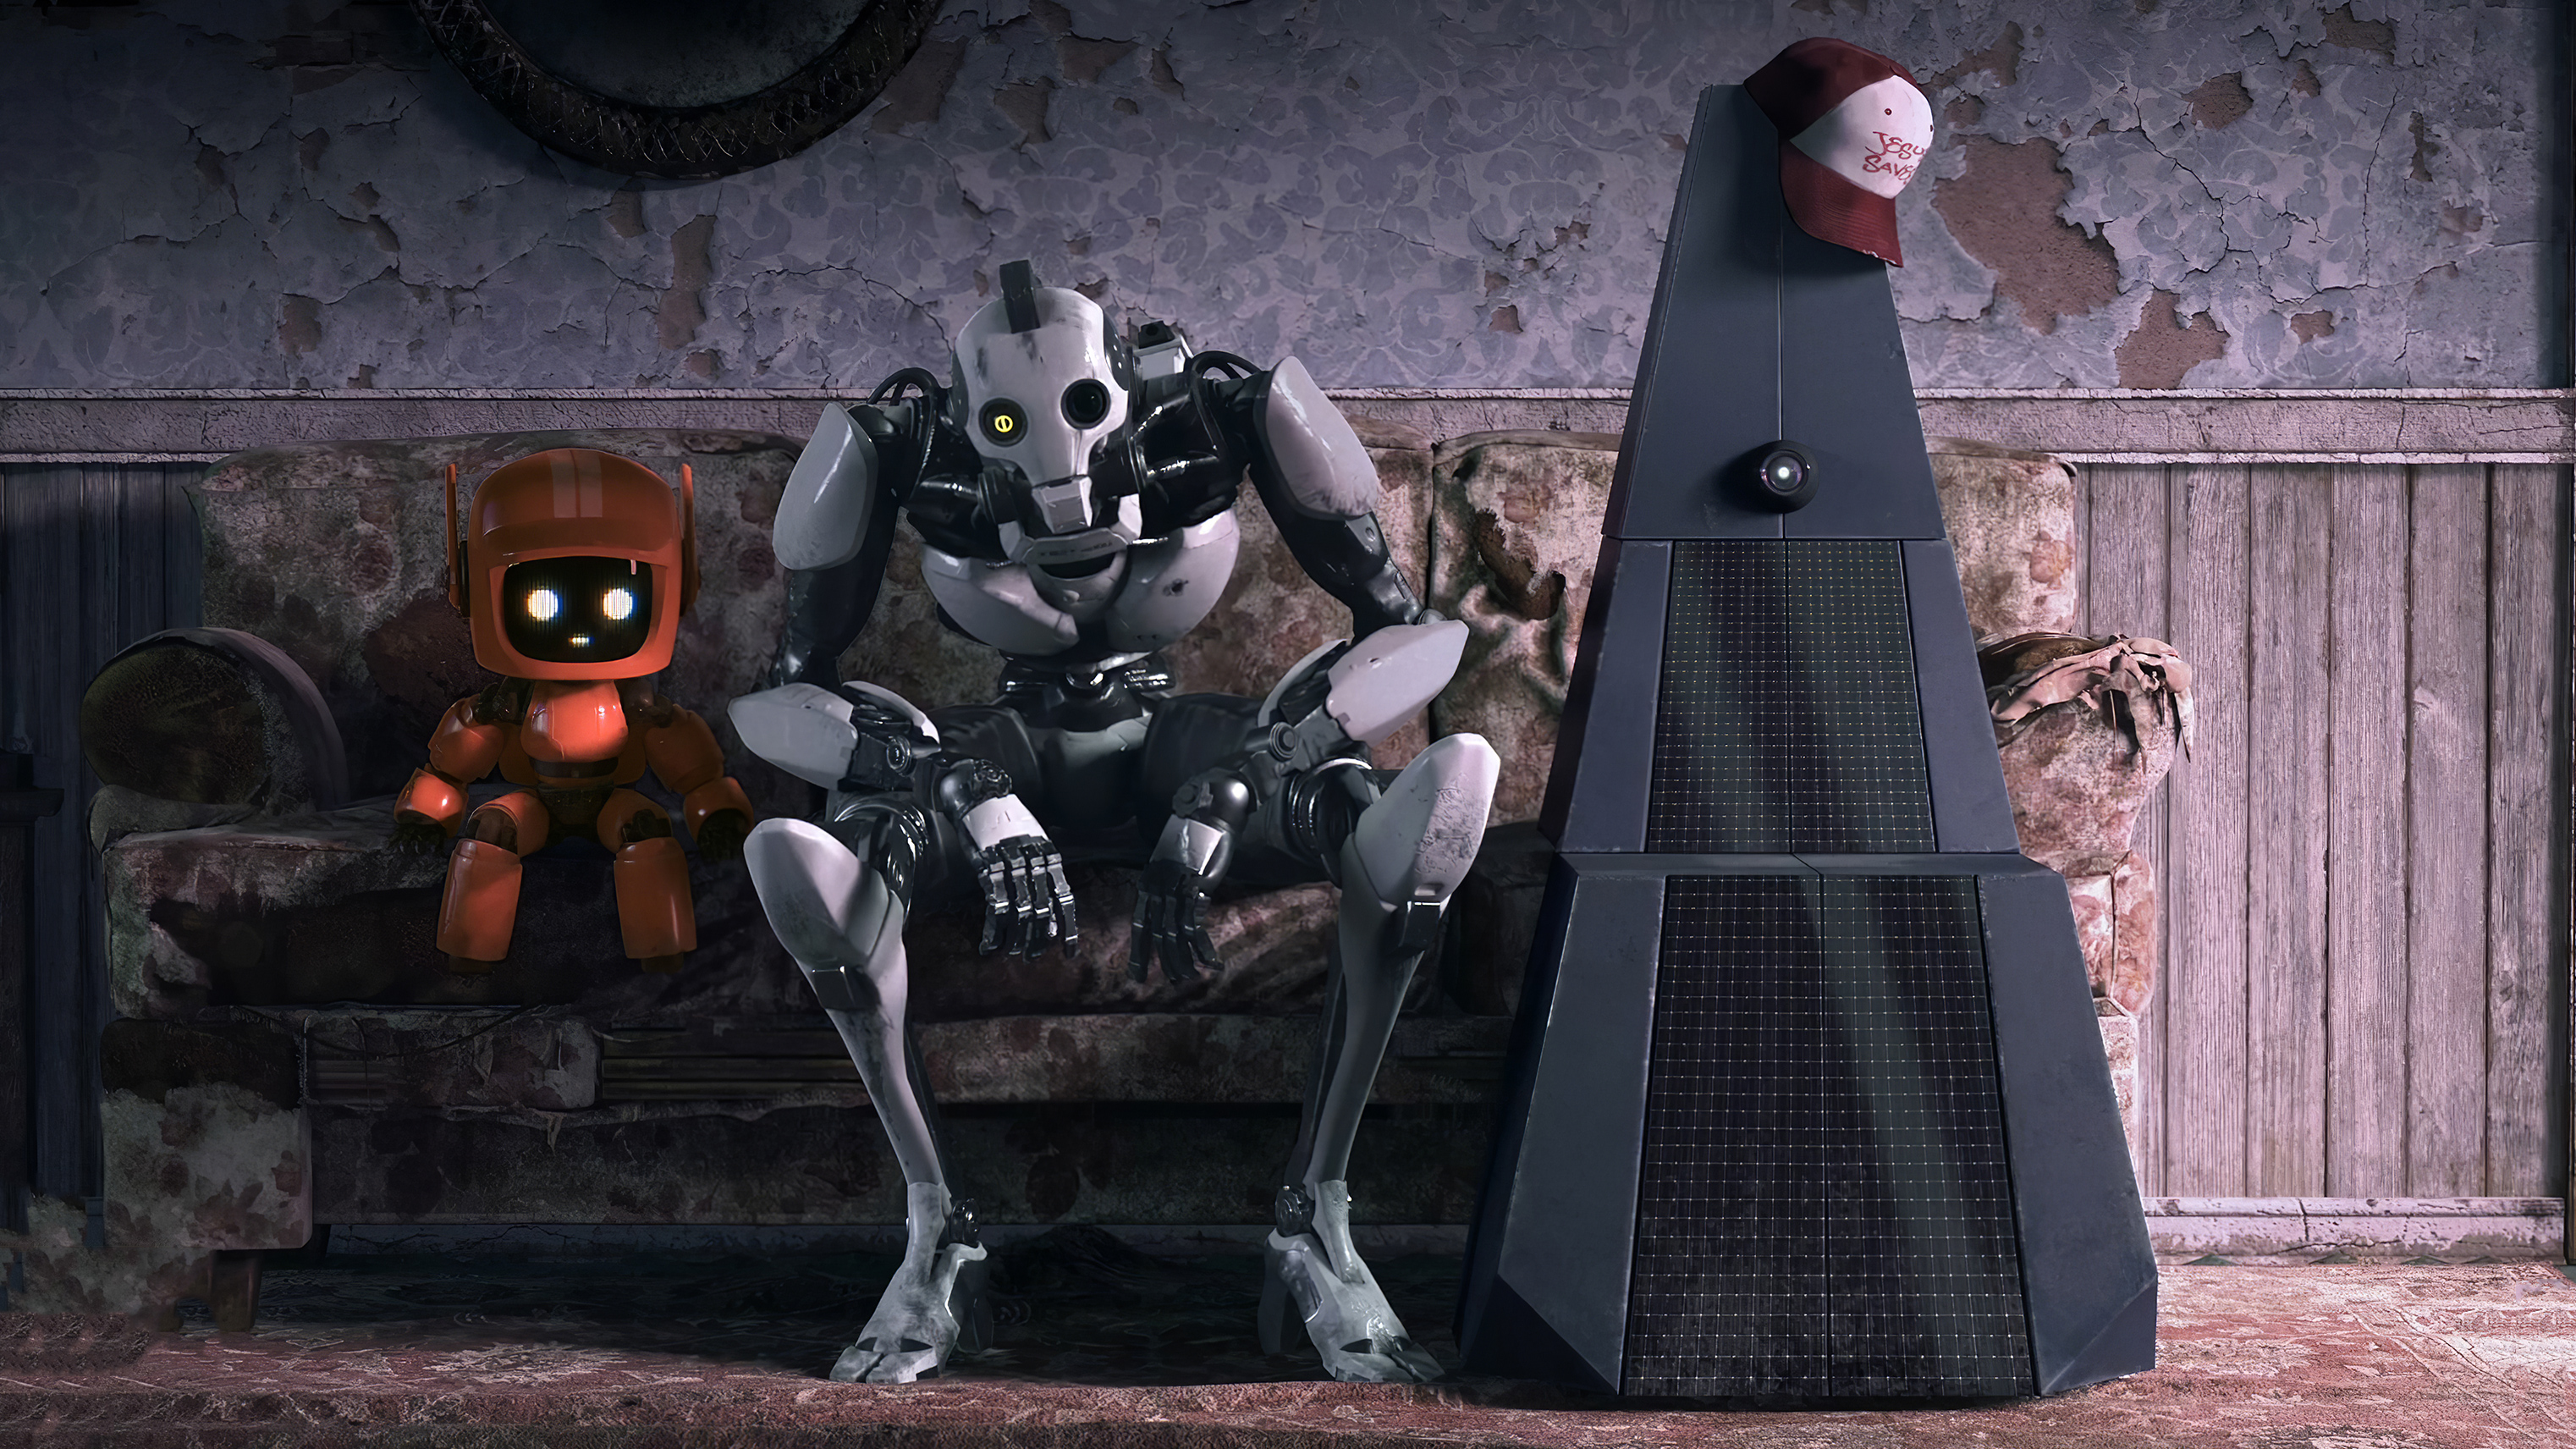 HD wallpaper featuring characters XBOT 4000 and K-VRC from Love, Death & Robots animated series, posed in a dimly lit room with rustic decor.